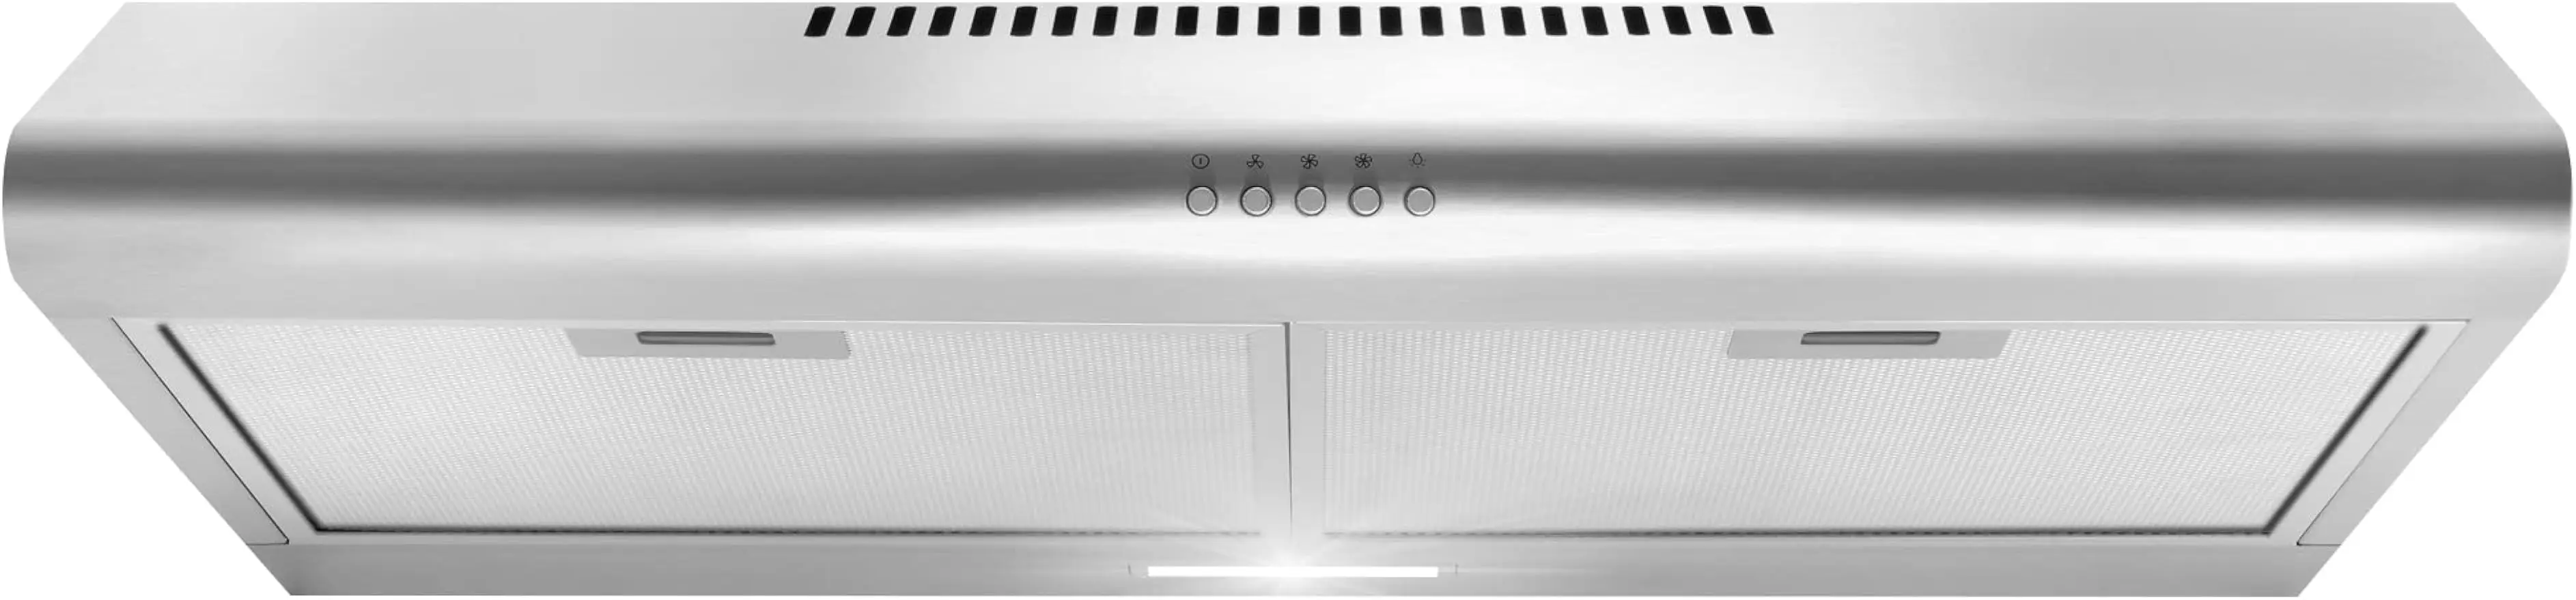 

COSMO COS-5MU30 30 in. Under Cabinet Range Hood Ductless Convertible Duct, Slim Kitchen Stove Vent with 3 Speed Exhaust Fan